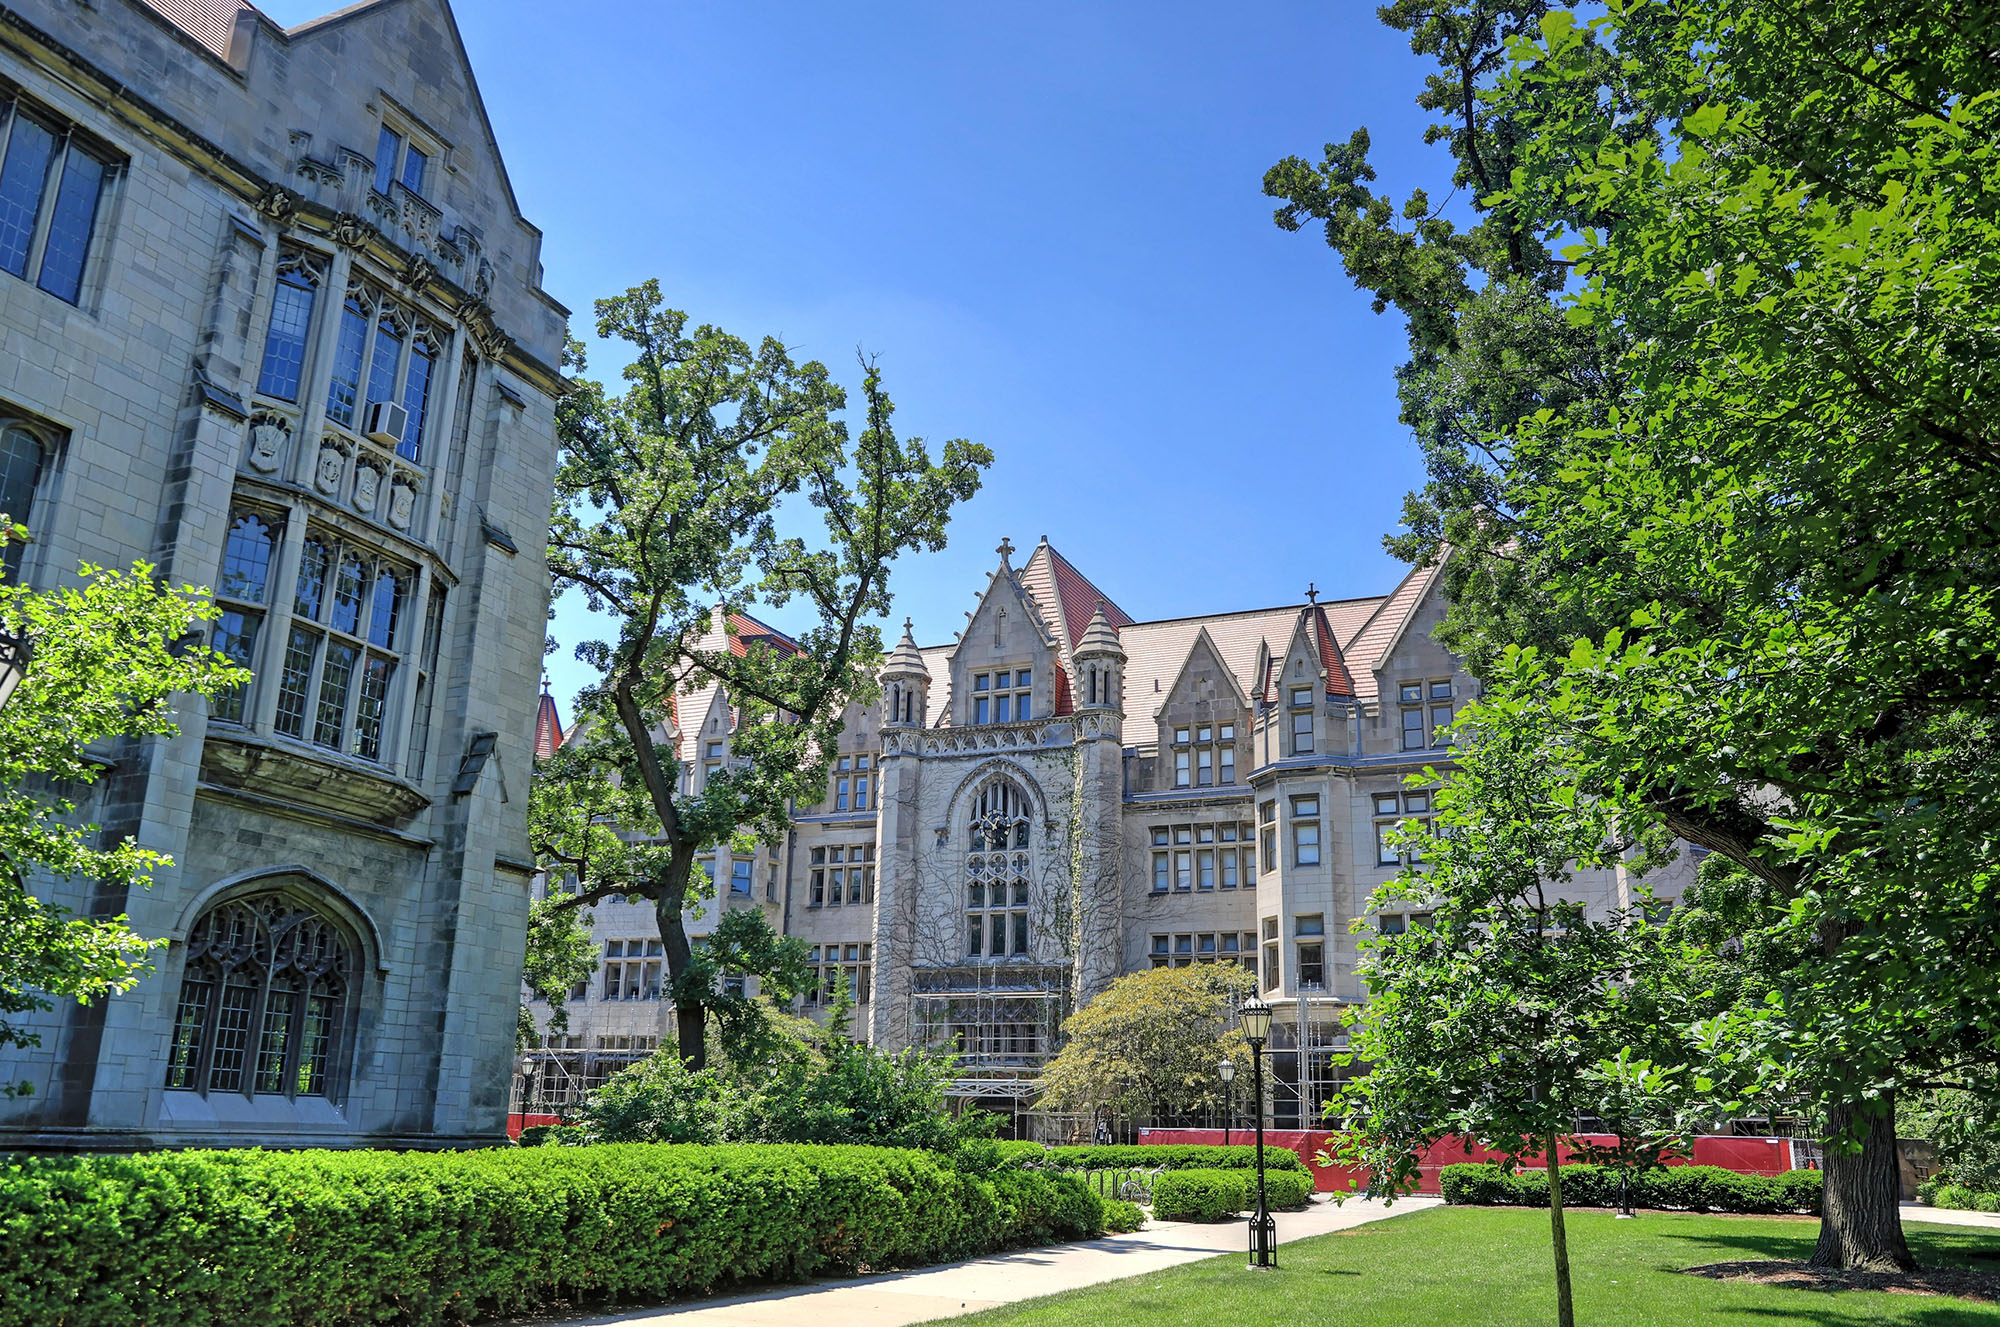 University of Chicago buildings at Chicago's Hyde Park neighborhood